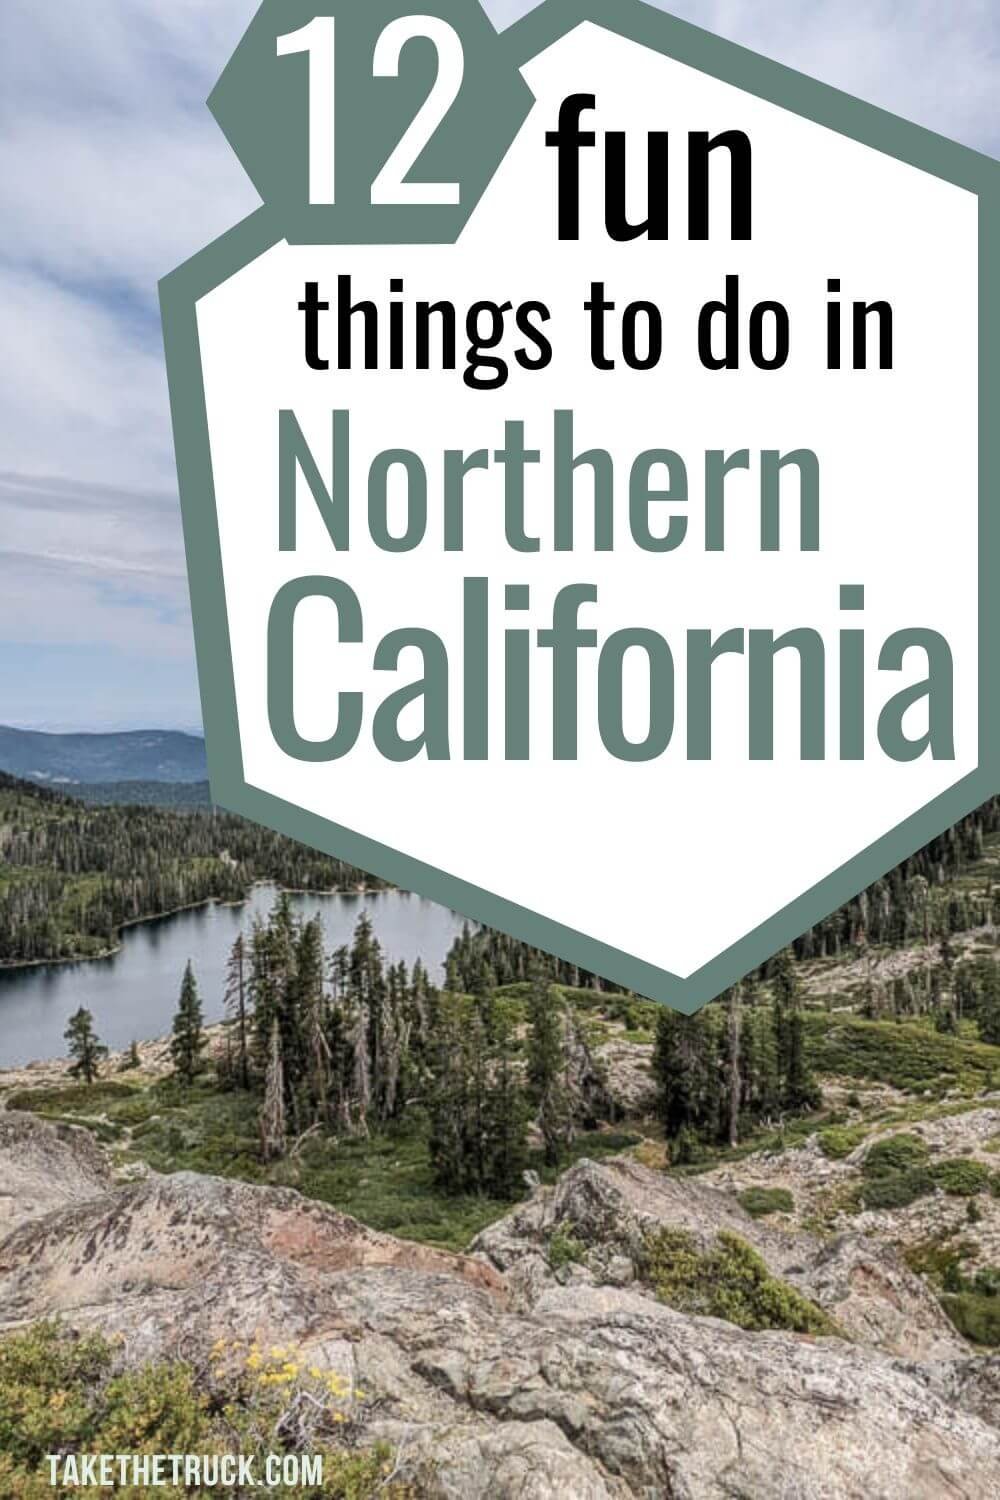 12 places to visit in northern california - things to do in northern california with kids - top places to visit in northern california -12 things to do in northern california